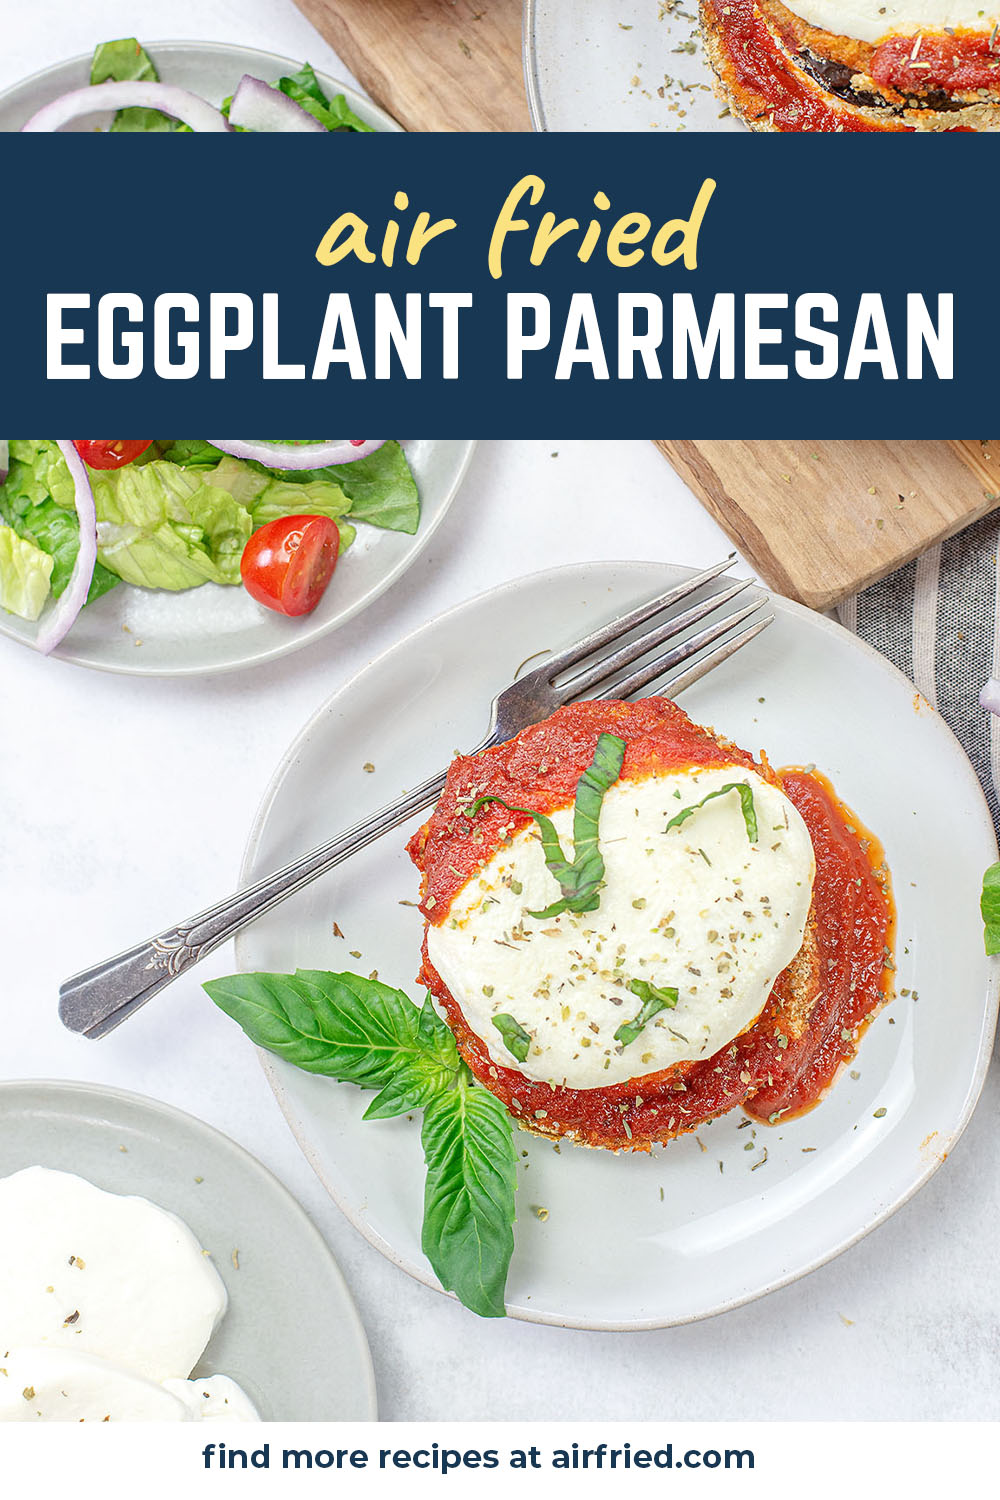 Eggplant Parmesan is a great way to enjoy eggplant.  This air fryer recipe makes it flavorful, and gives it a wonderful texture.